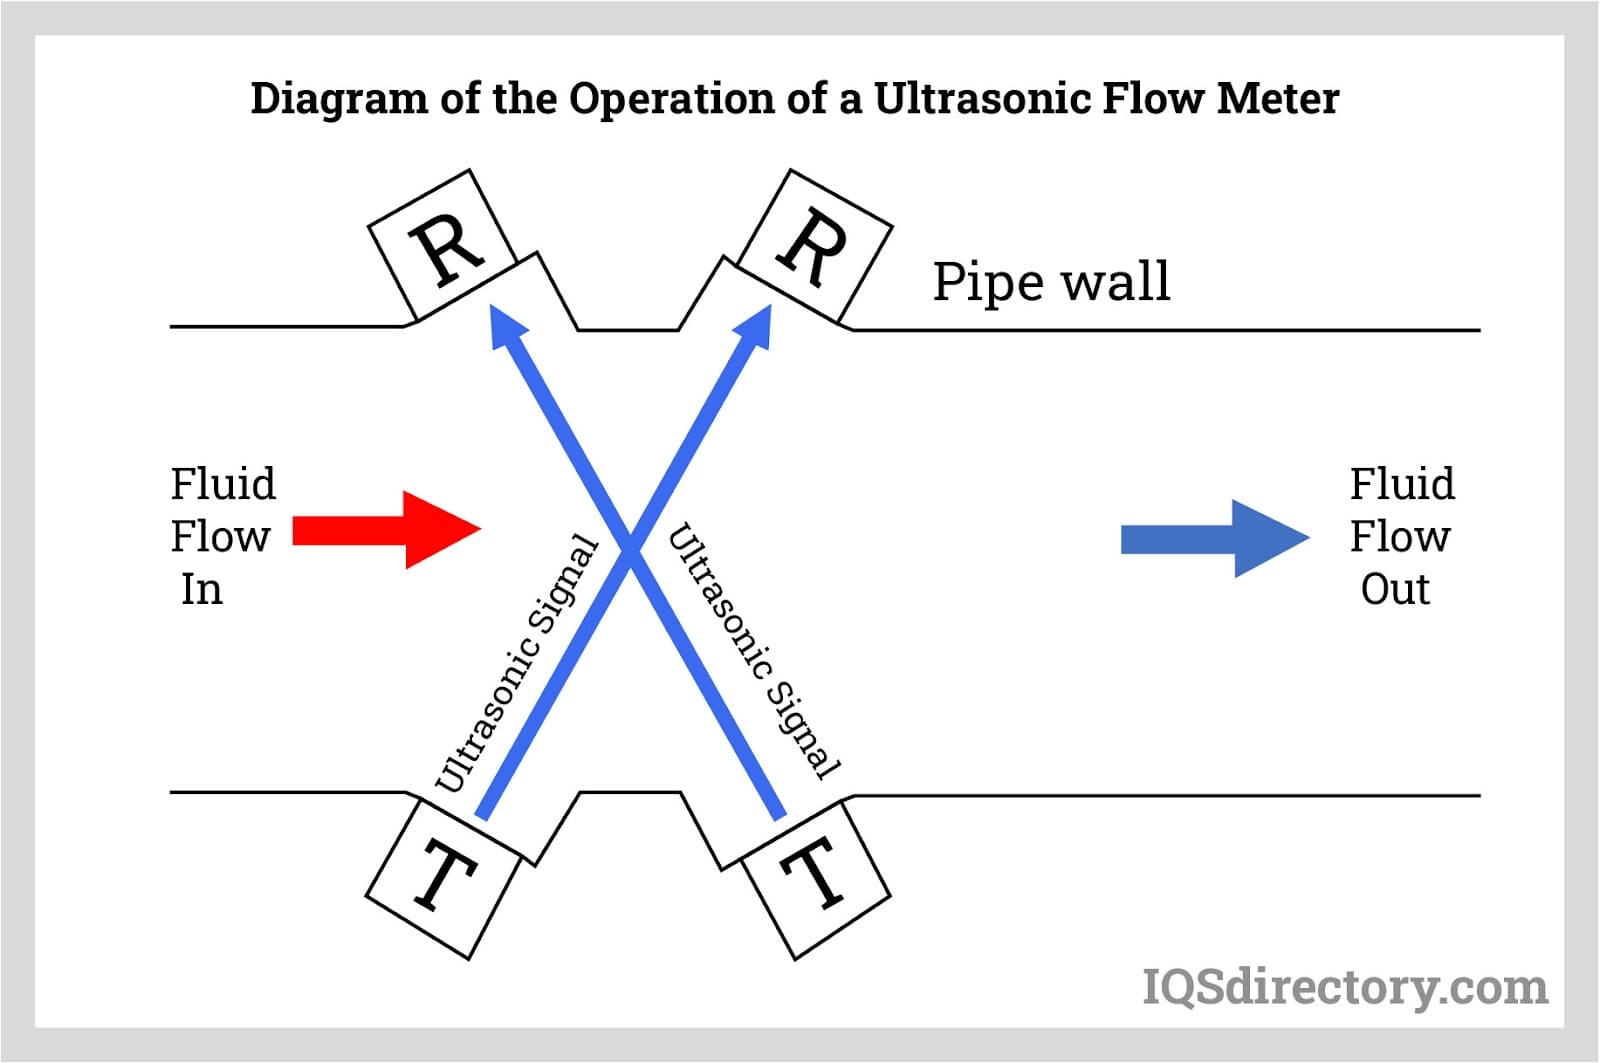 Diagram of the Operation of a Ultrasonic Flow Meter